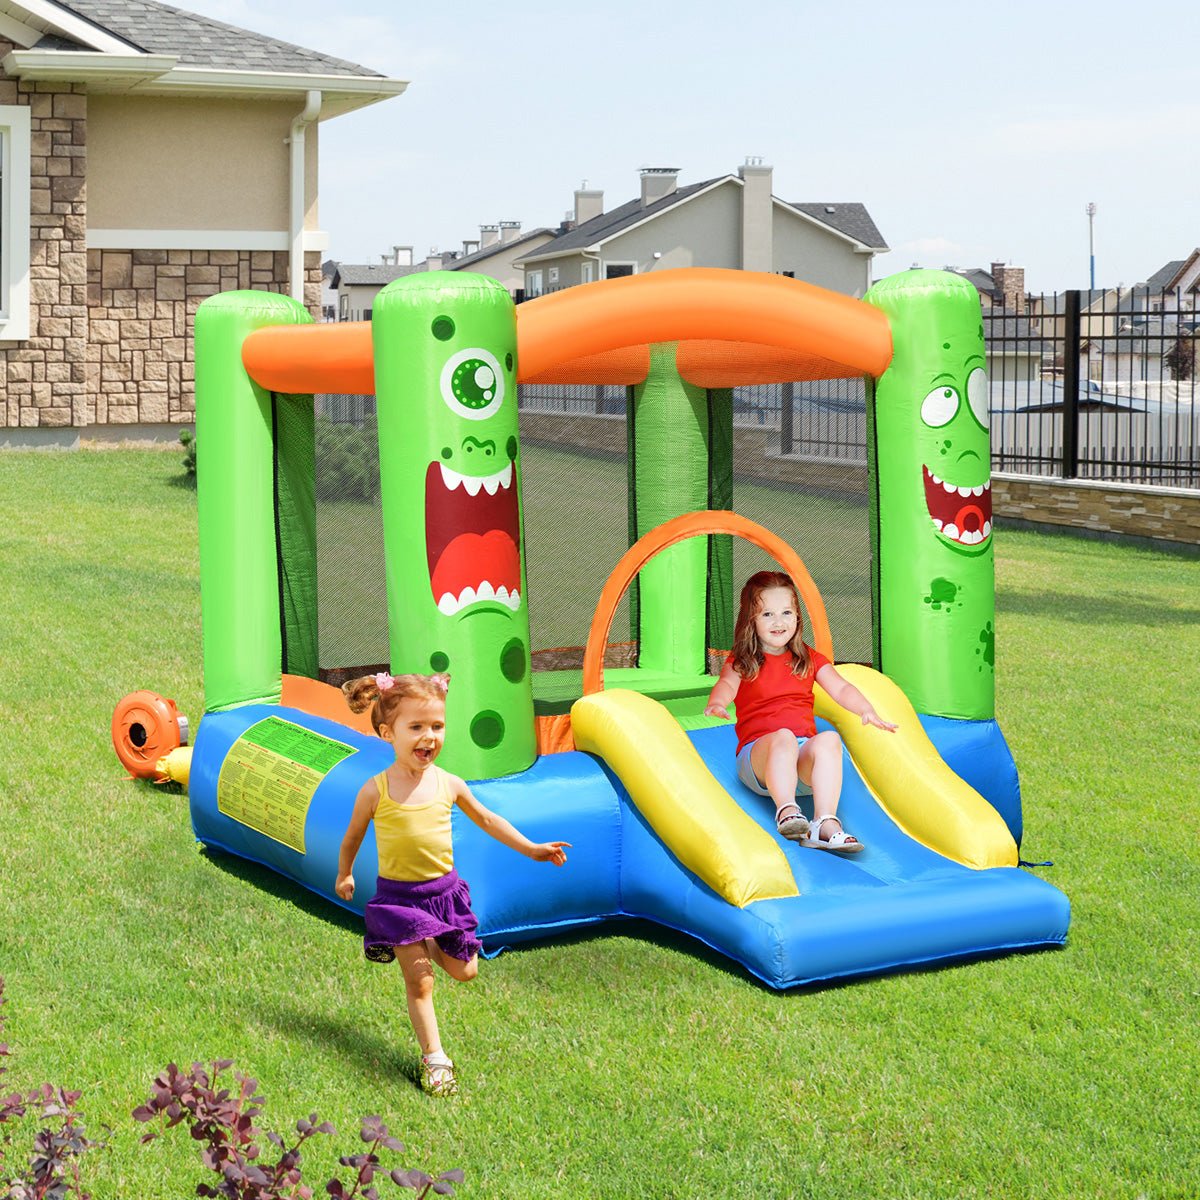 Kids Inflatable Playhouse - Bounce, Slide, and Basketball Excitement